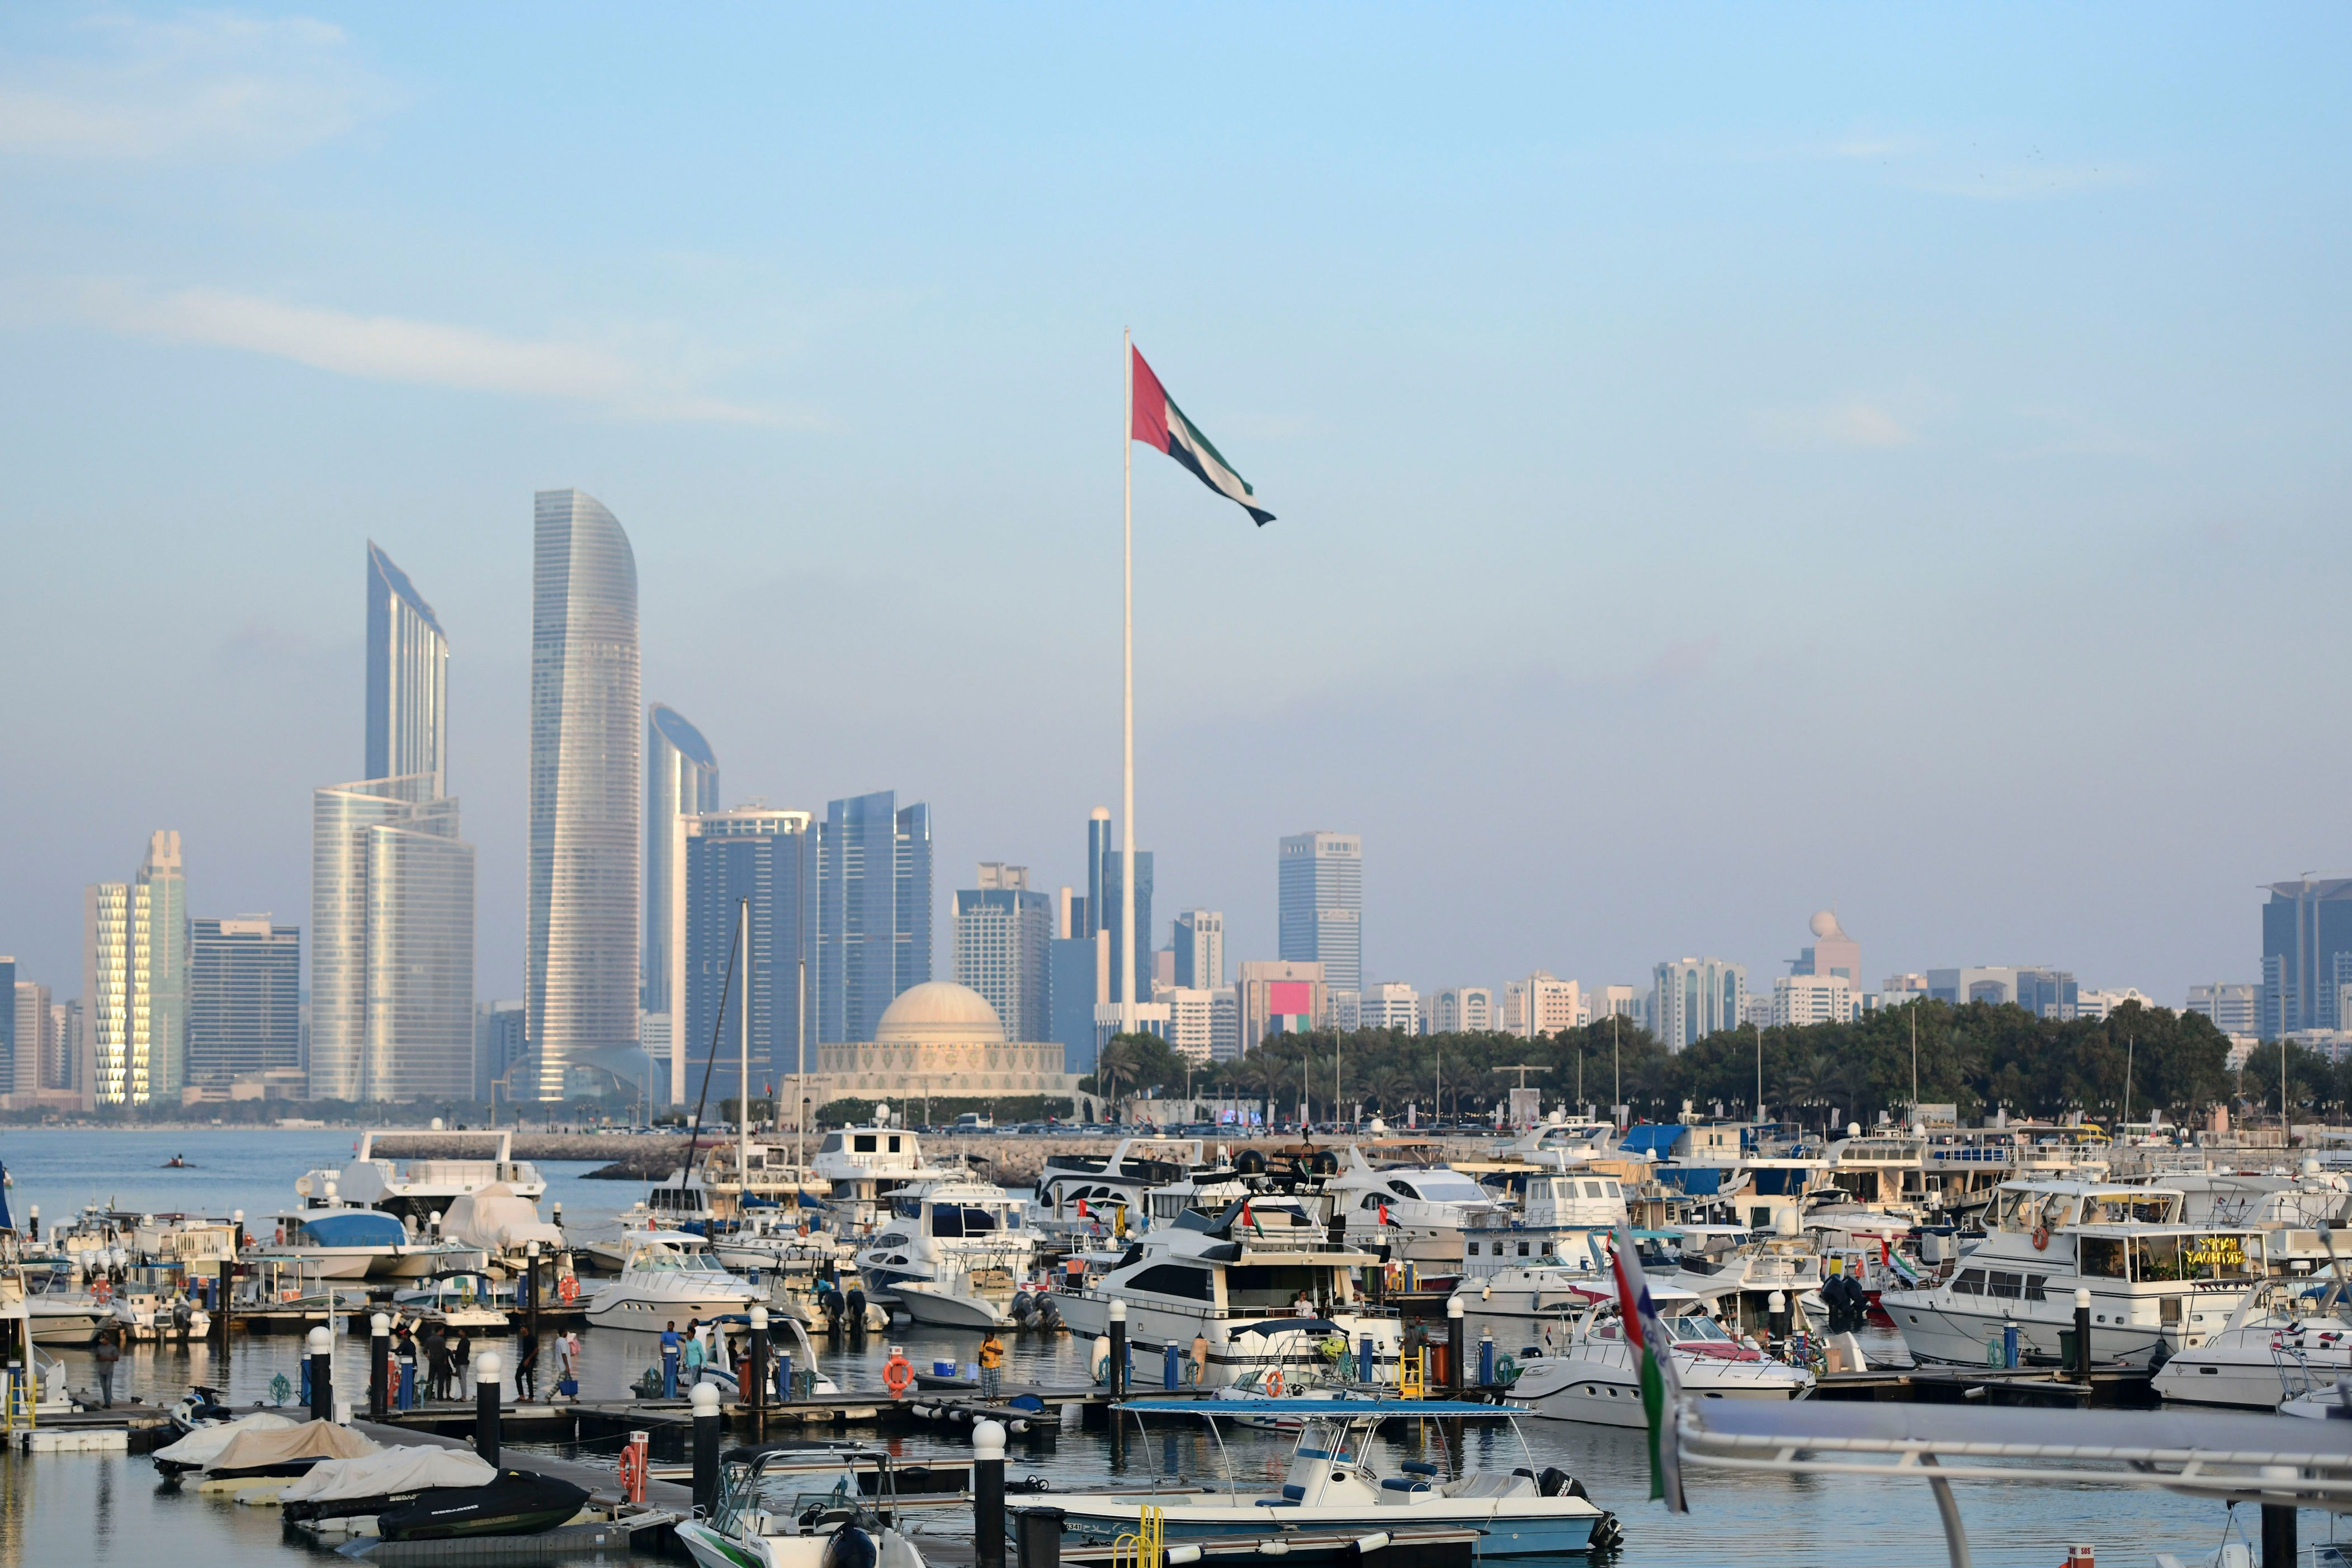 uae national day holiday announced for public sector